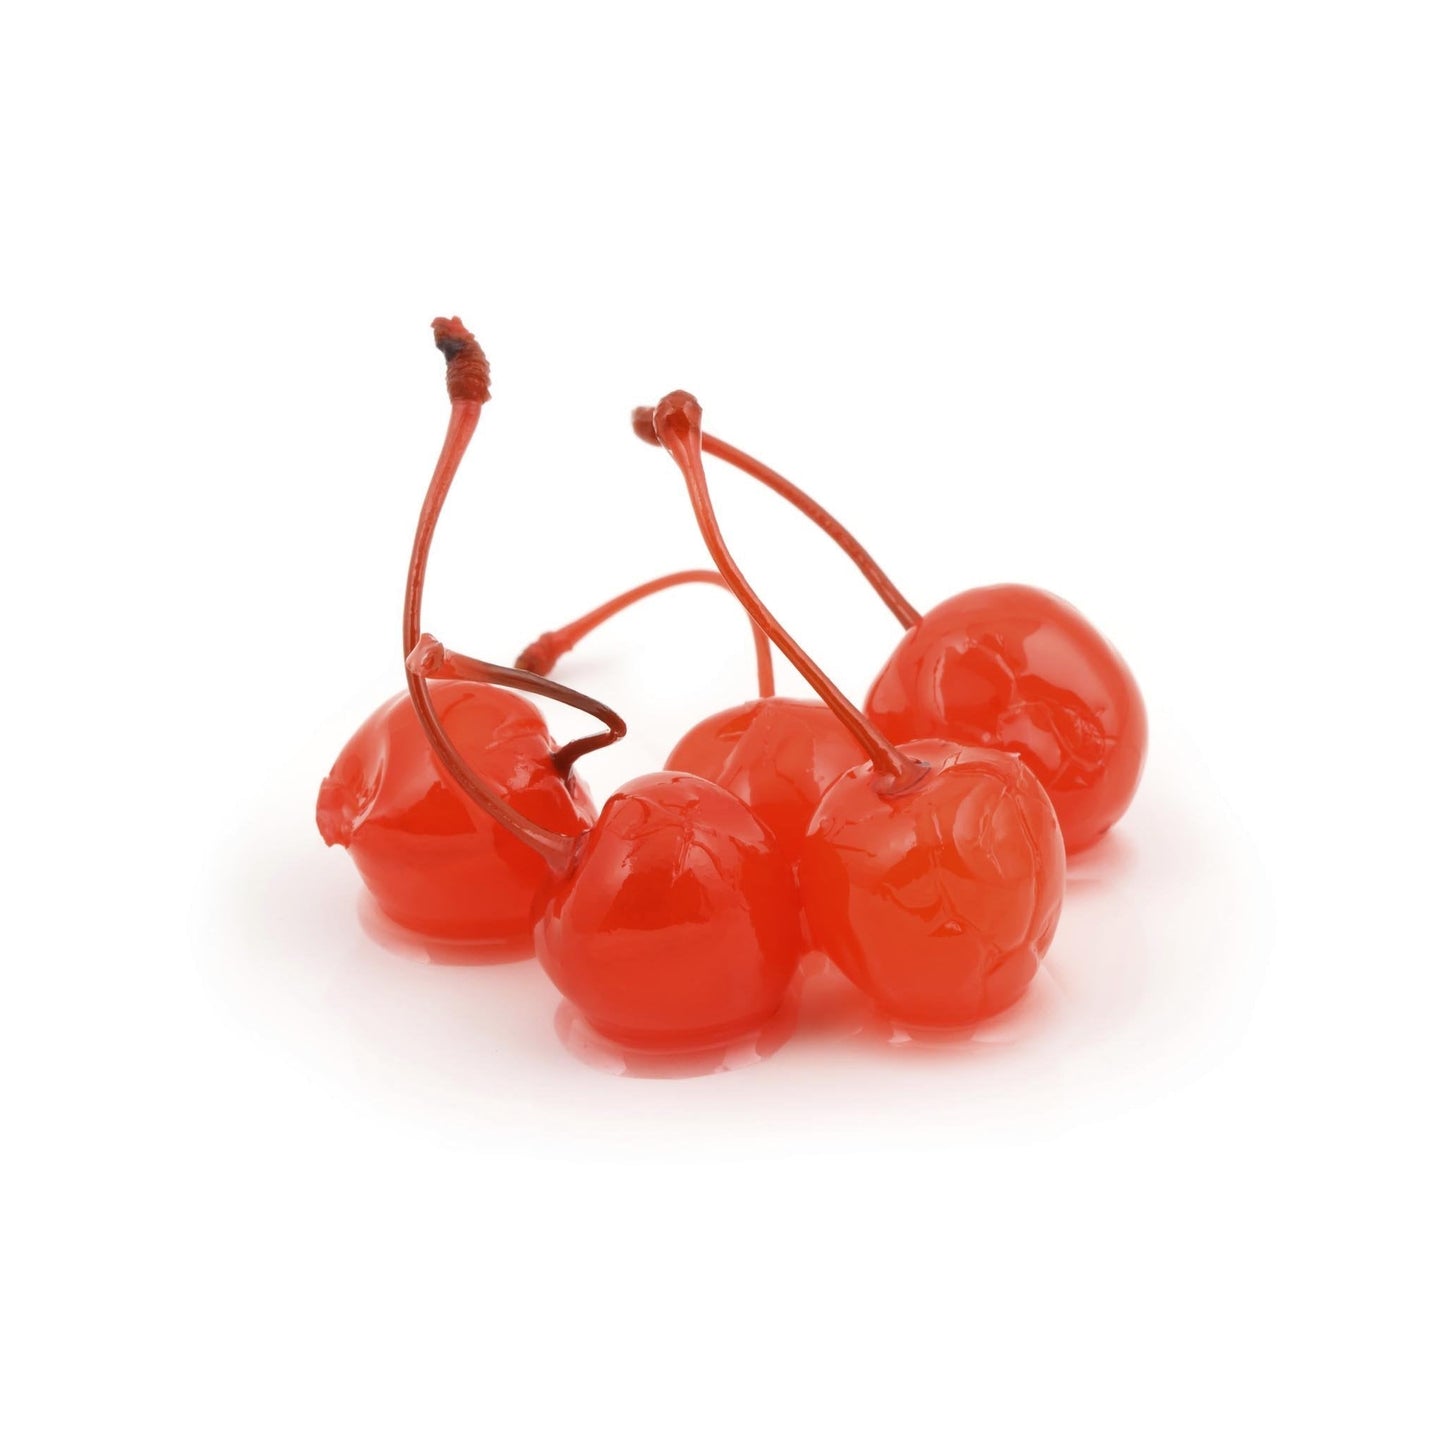 Cherries - With Stems